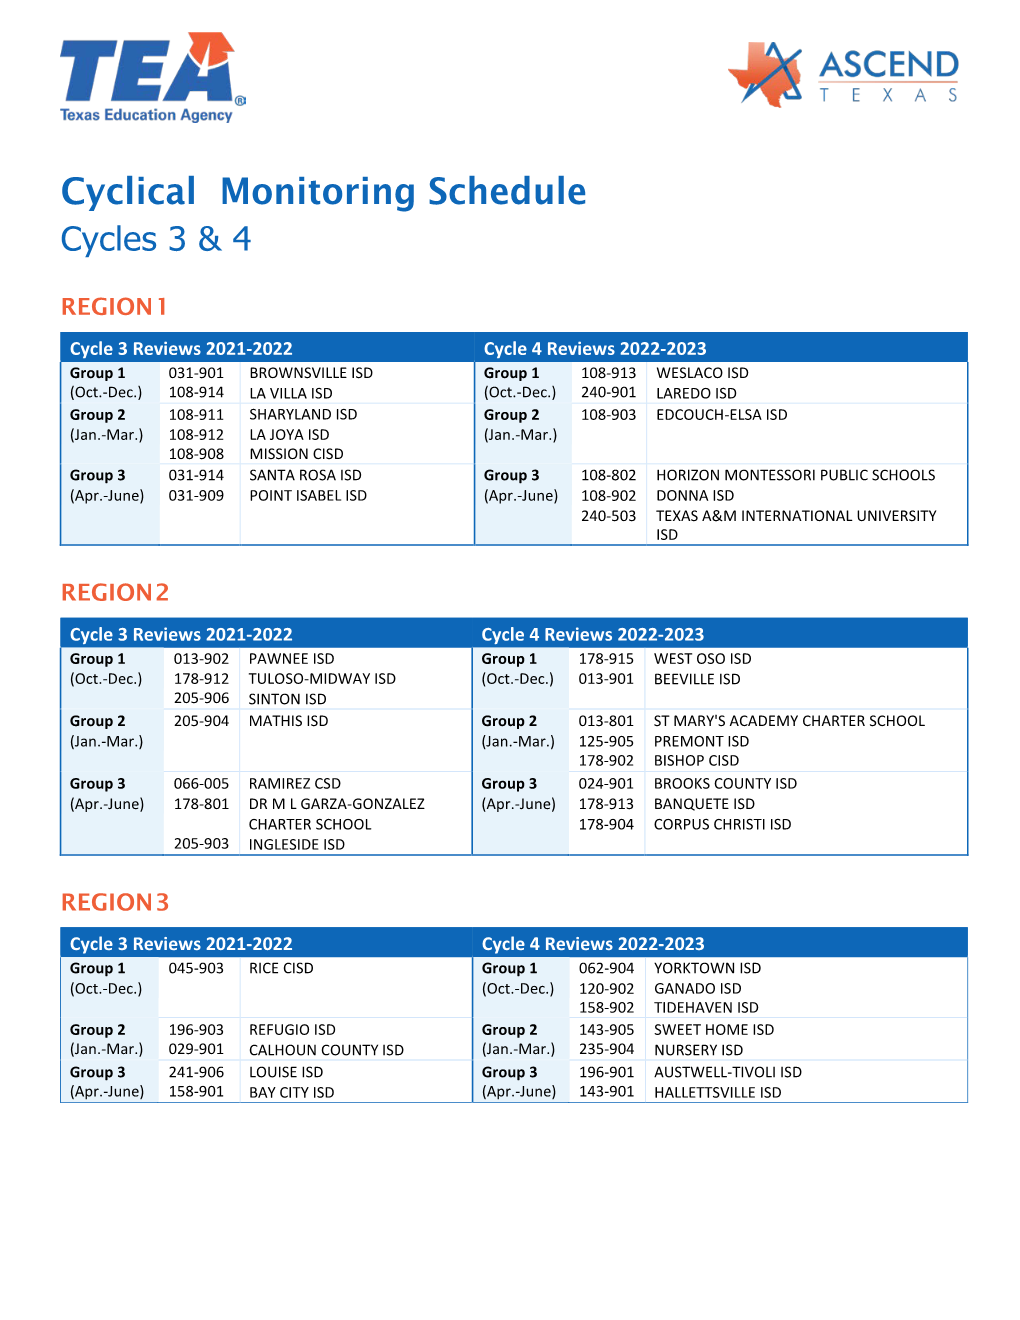 Cyclical Monitoring Schedule Cycles 3 & 4